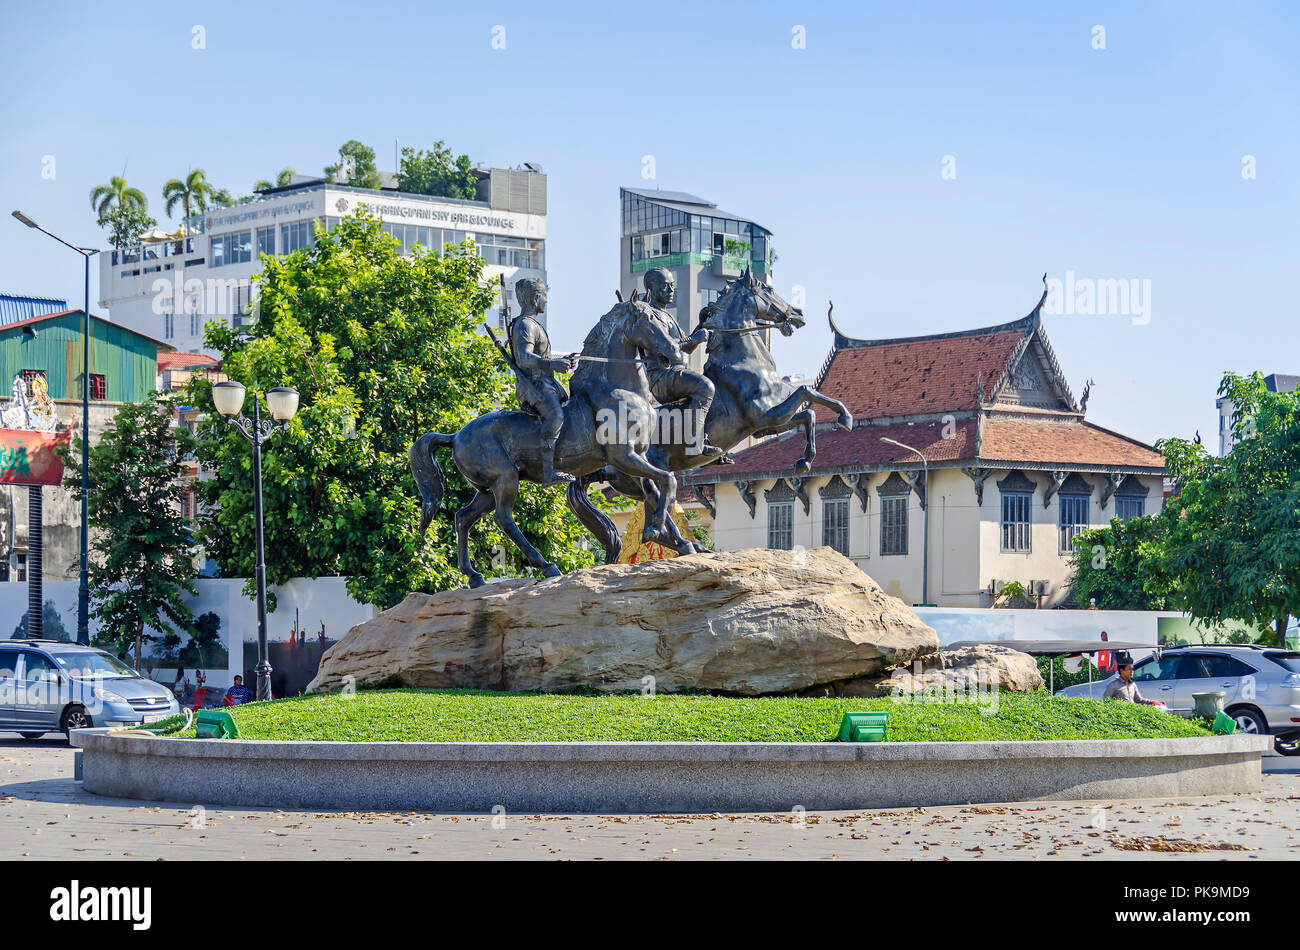 Phnom Penh, Cambodia - April 9, 2018: View of the Preah Sisowath Quay with the horse monument to the warriors Techo Meas and Techo Yot Stock Photo